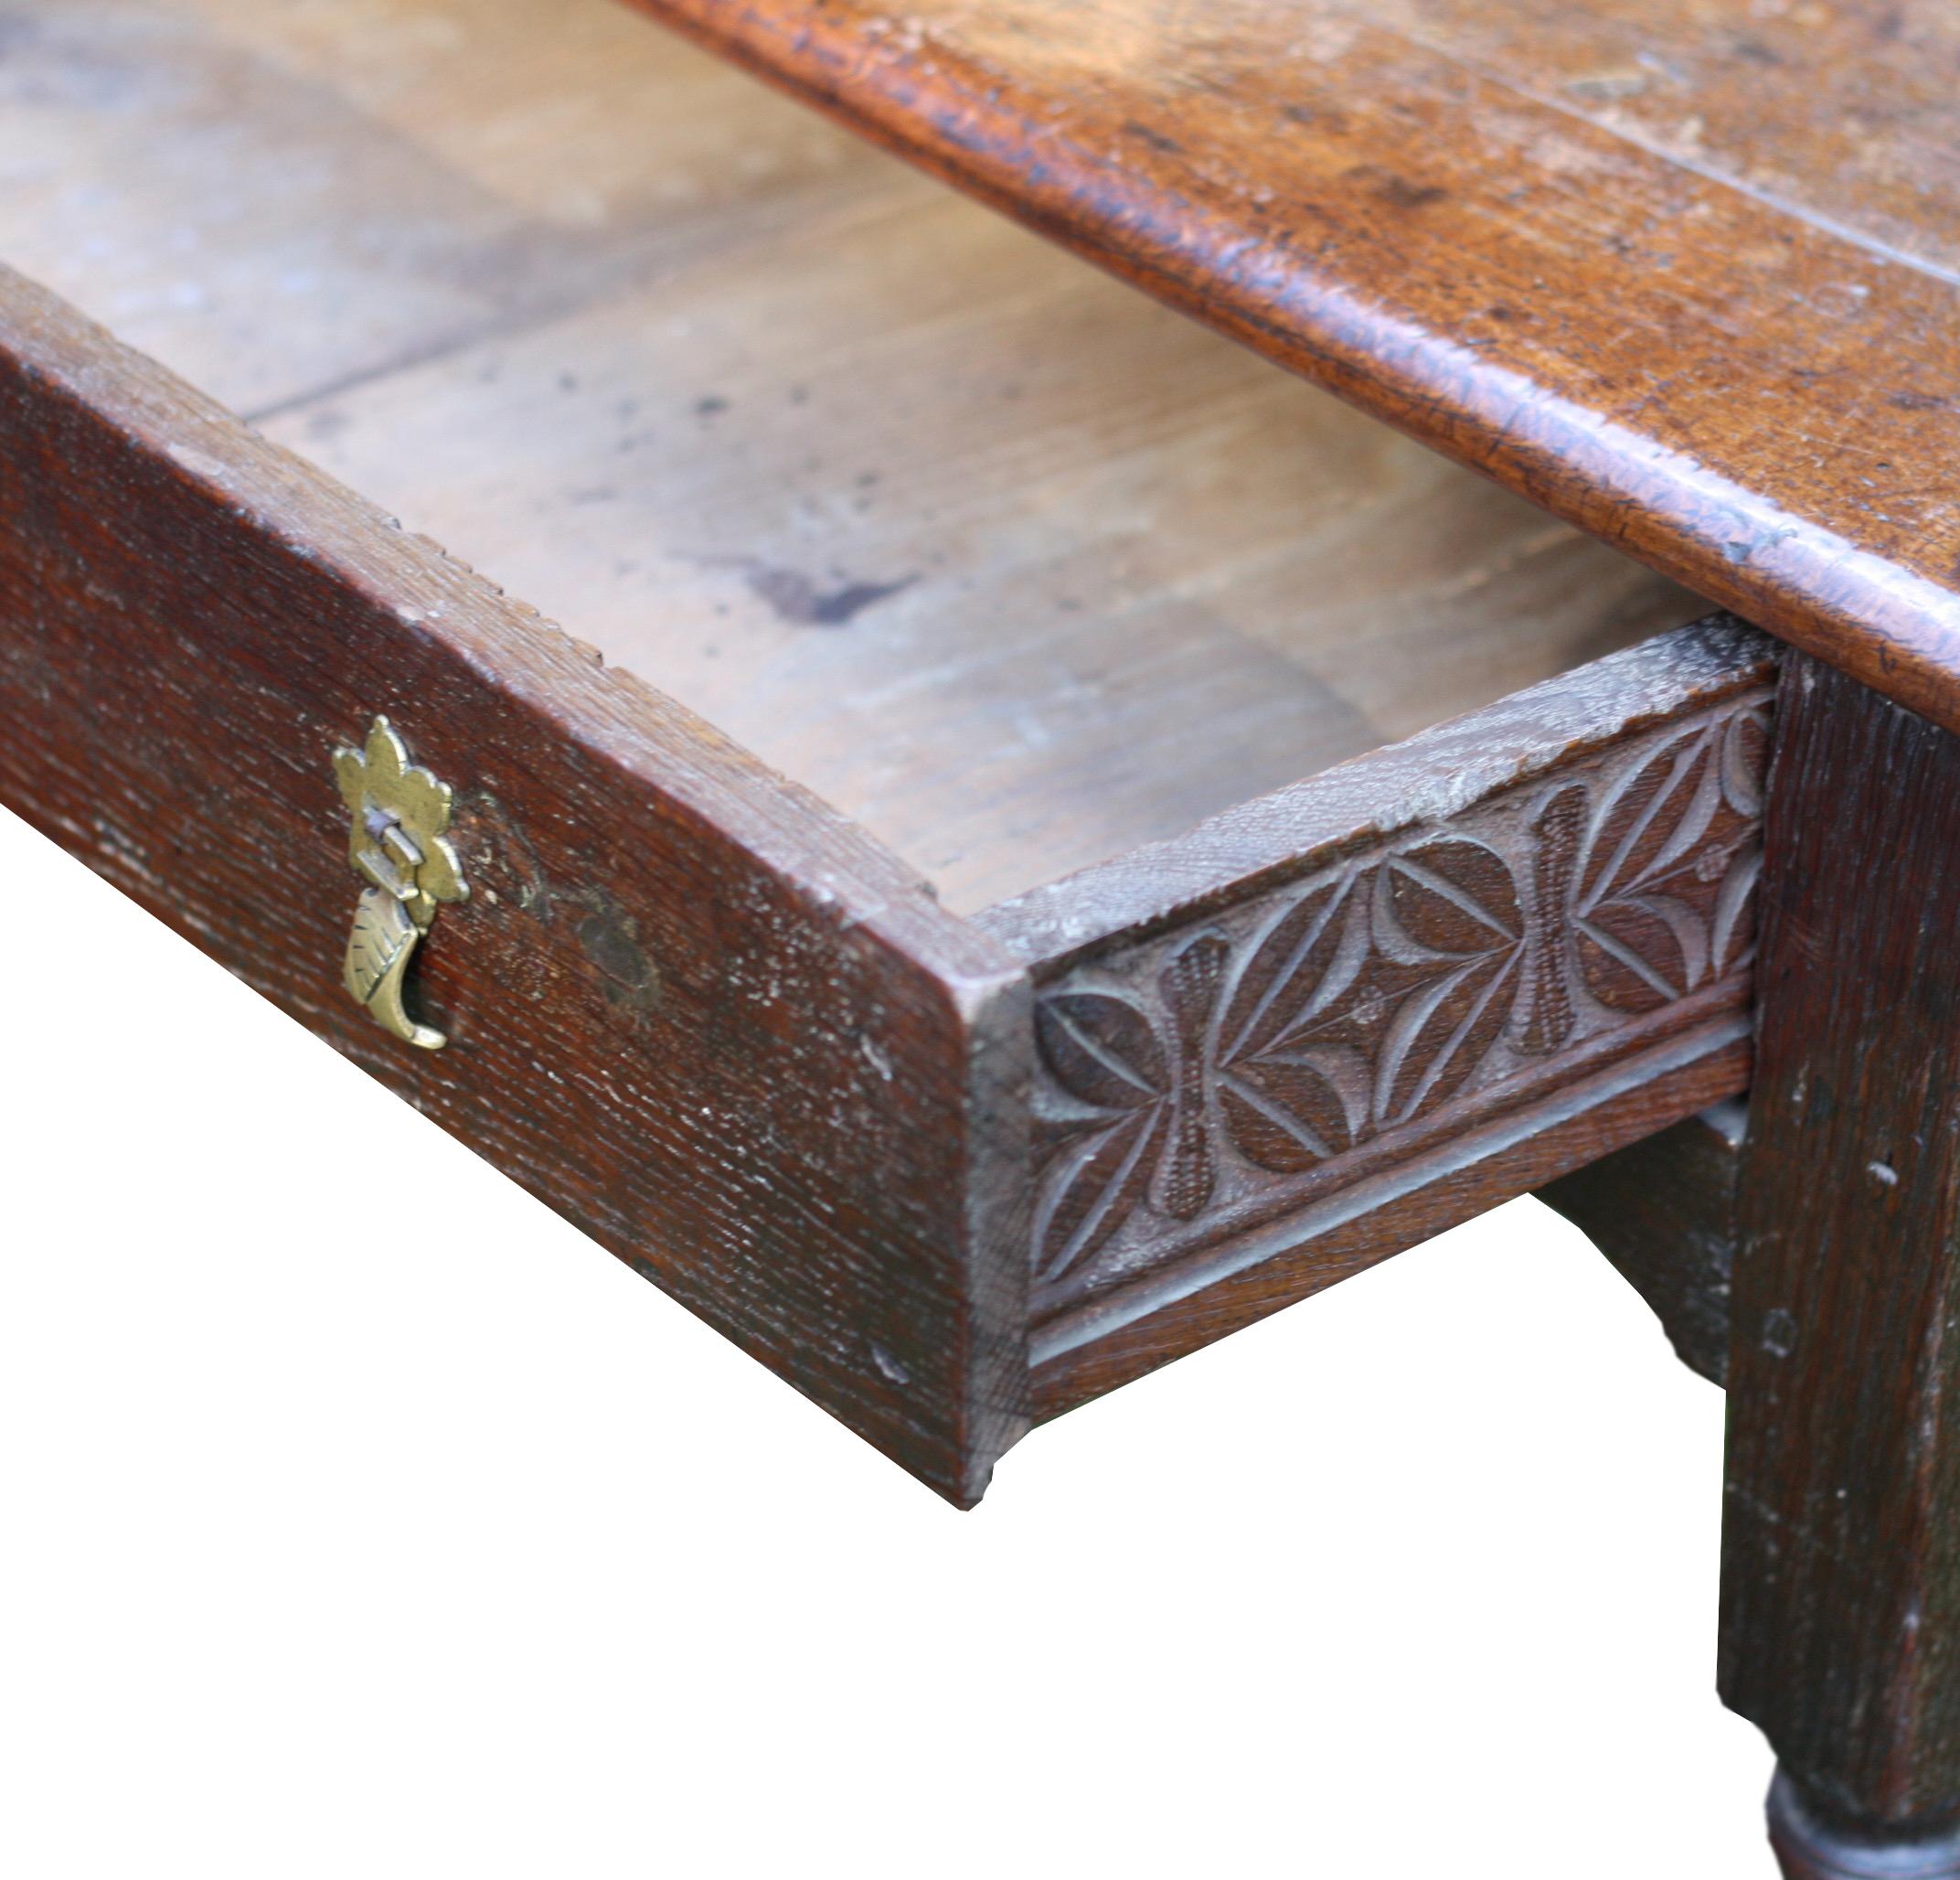 A wonderfully rare English Jacobean period oak side table.

Its appears to be all original and not made up from other pieces. It's understood that 17th century furniture makers often worked side by side with individuals making such items as